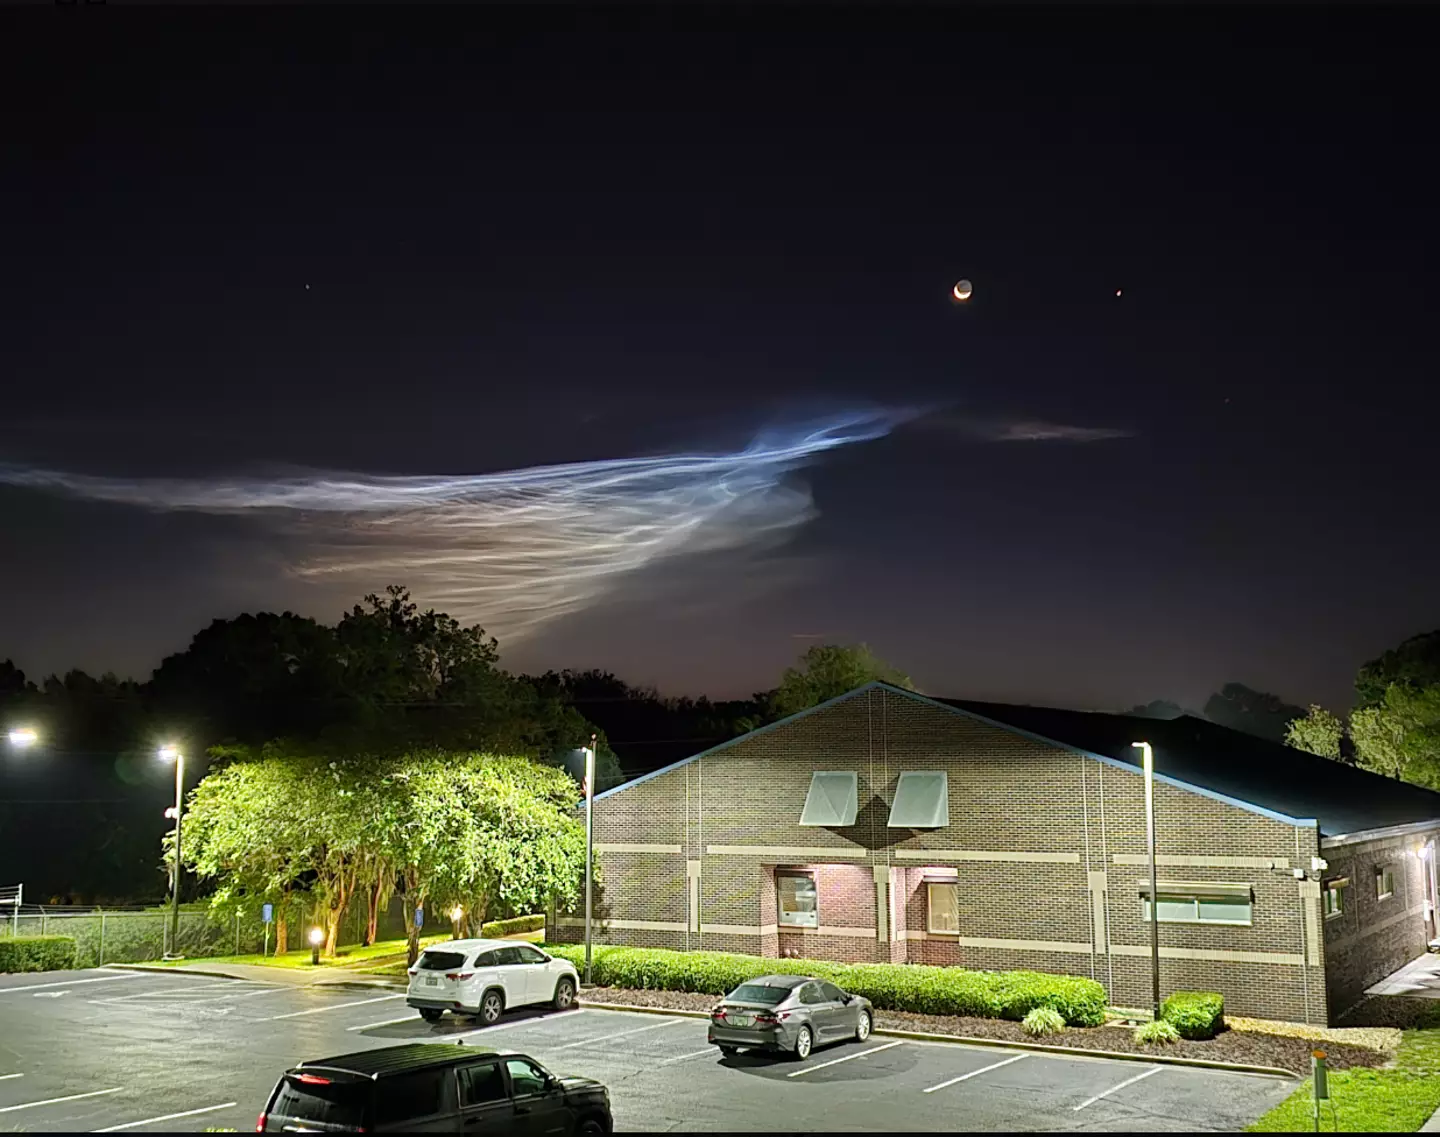 Noctilucent clouds essentially look like a slivery wisp of cloud that is entwined with itself in a white and blue hue. (NWSTampaBay)